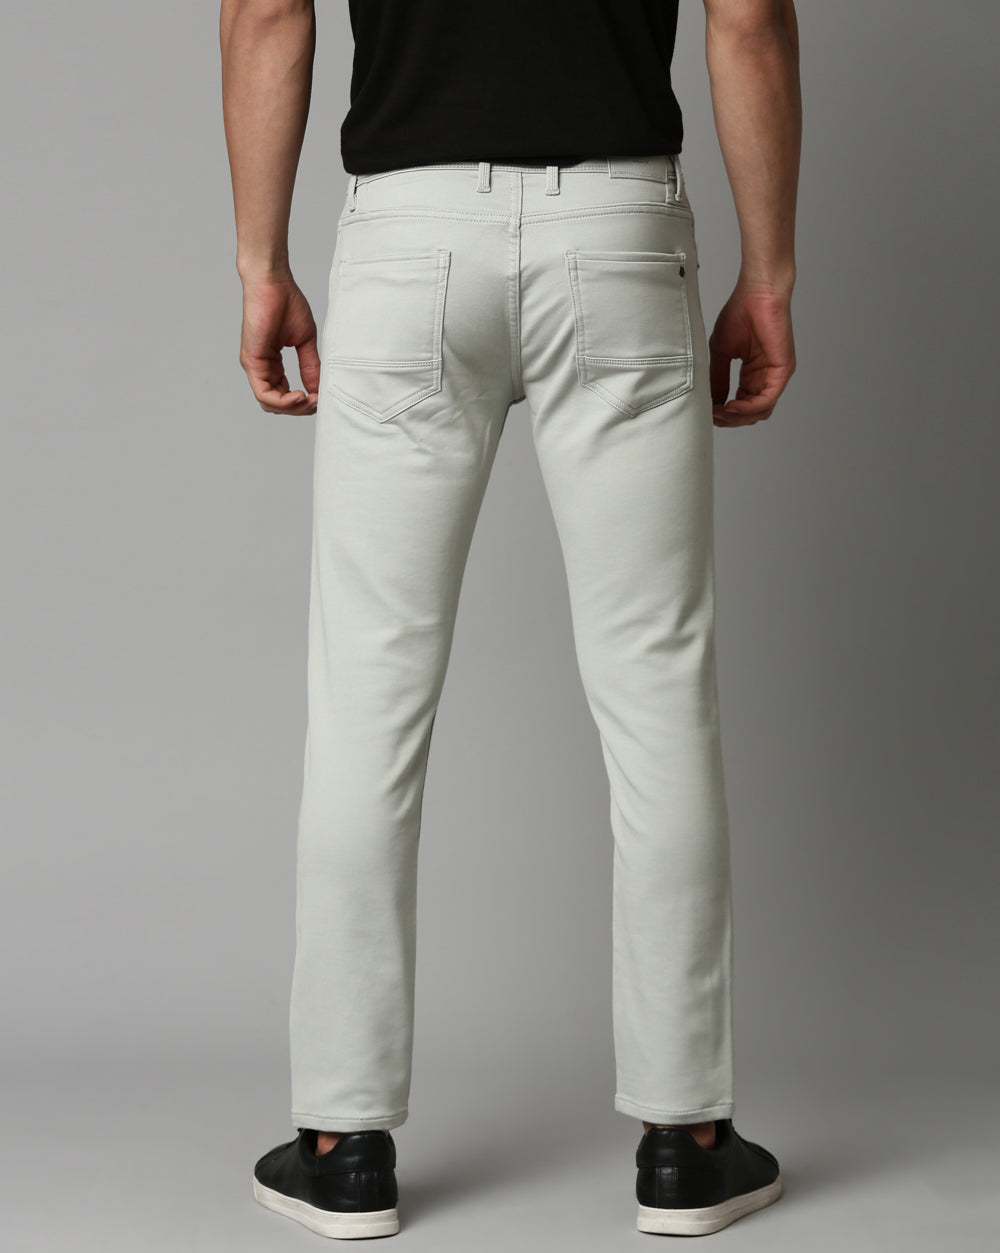 Quill Grey Colored Denim